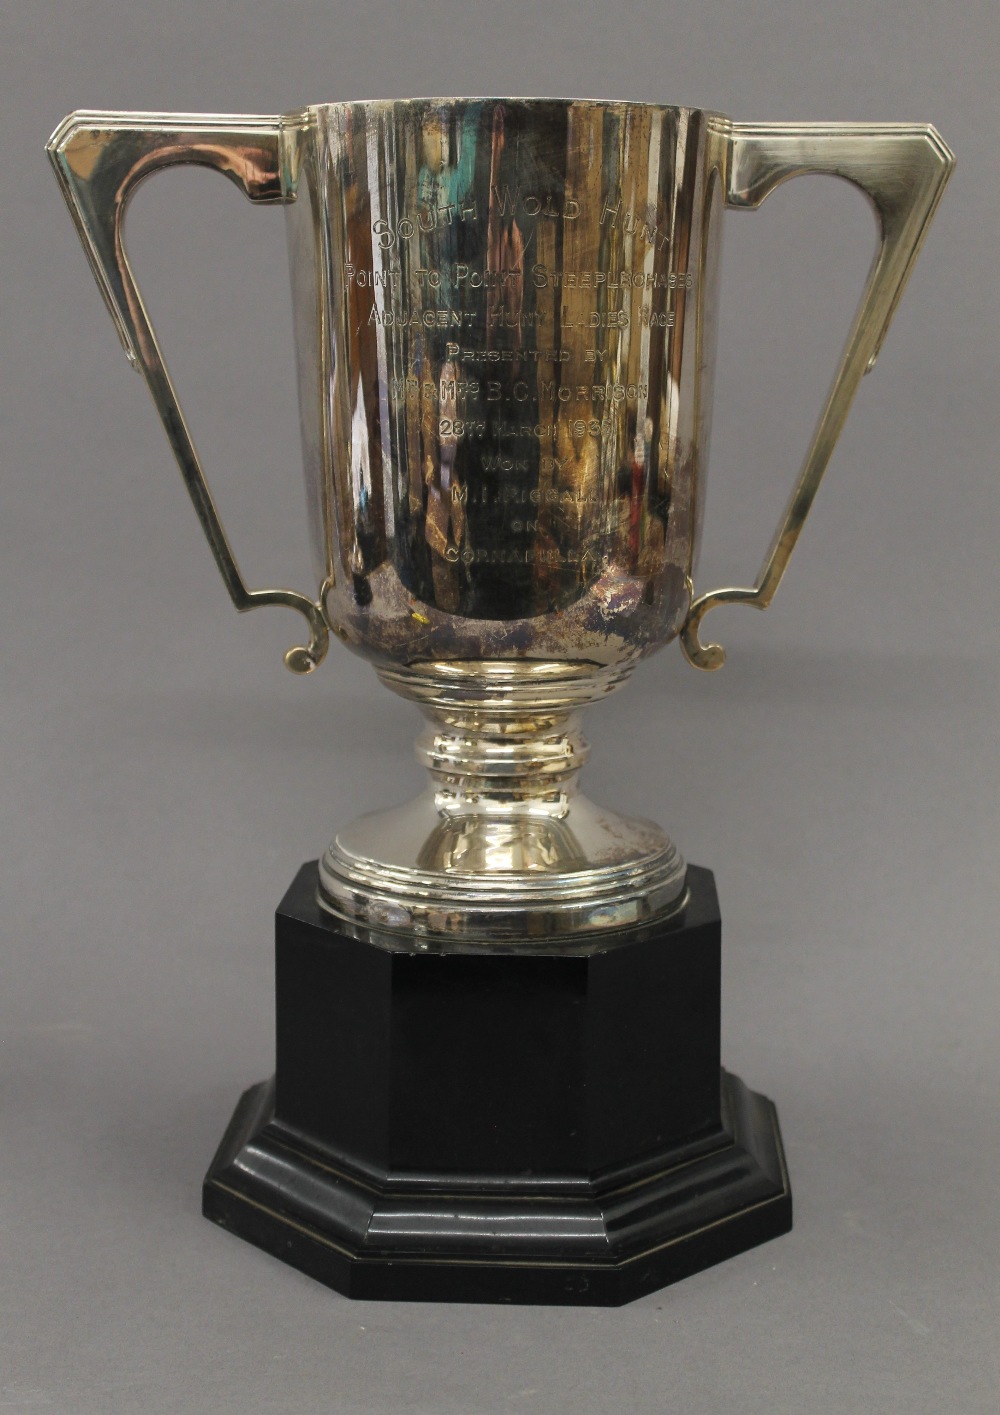 An engraved silver trophy cup on stand. 33.5 cm high overall. 30.2 troy ounces total weight. - Image 2 of 4